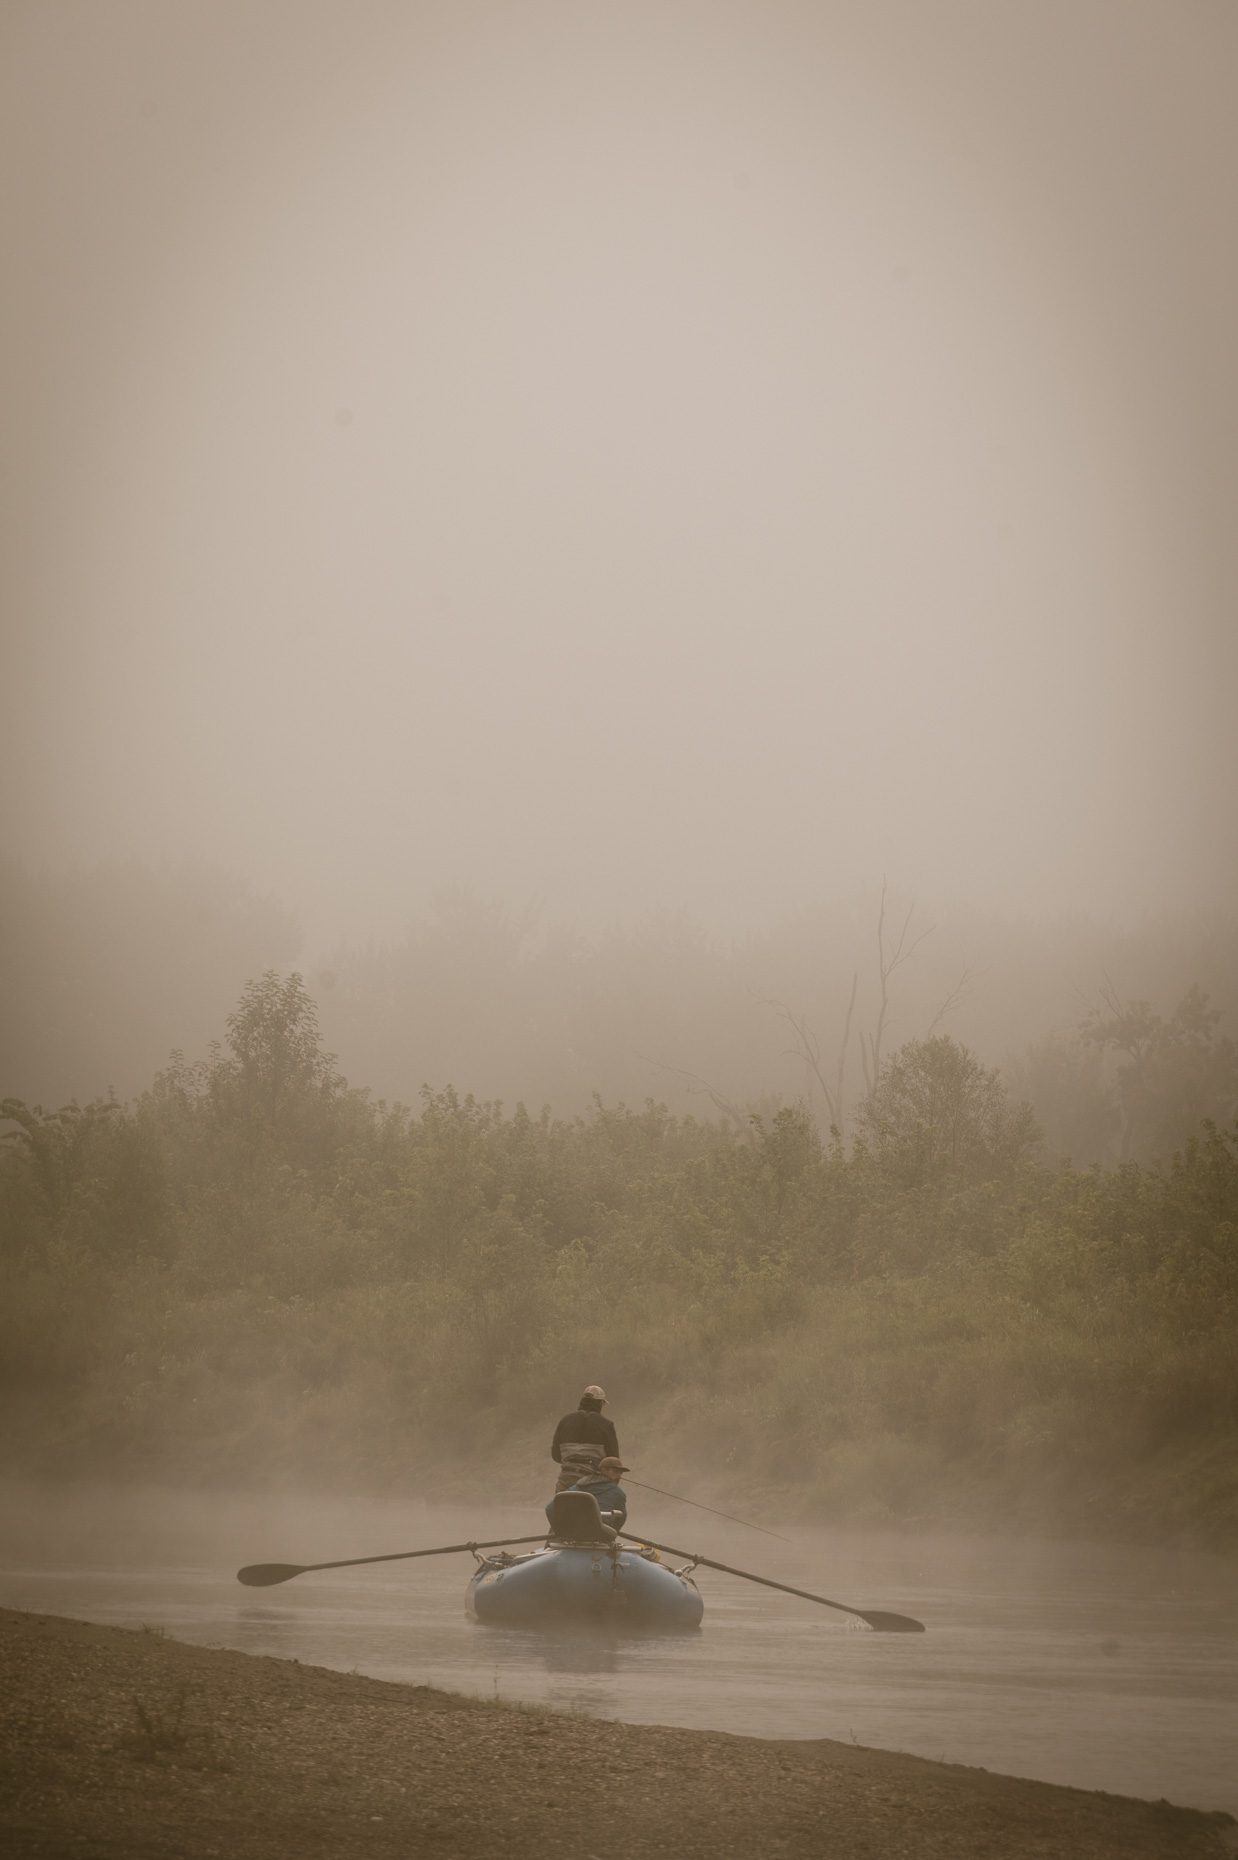 Fly fishing on the Connecticut River